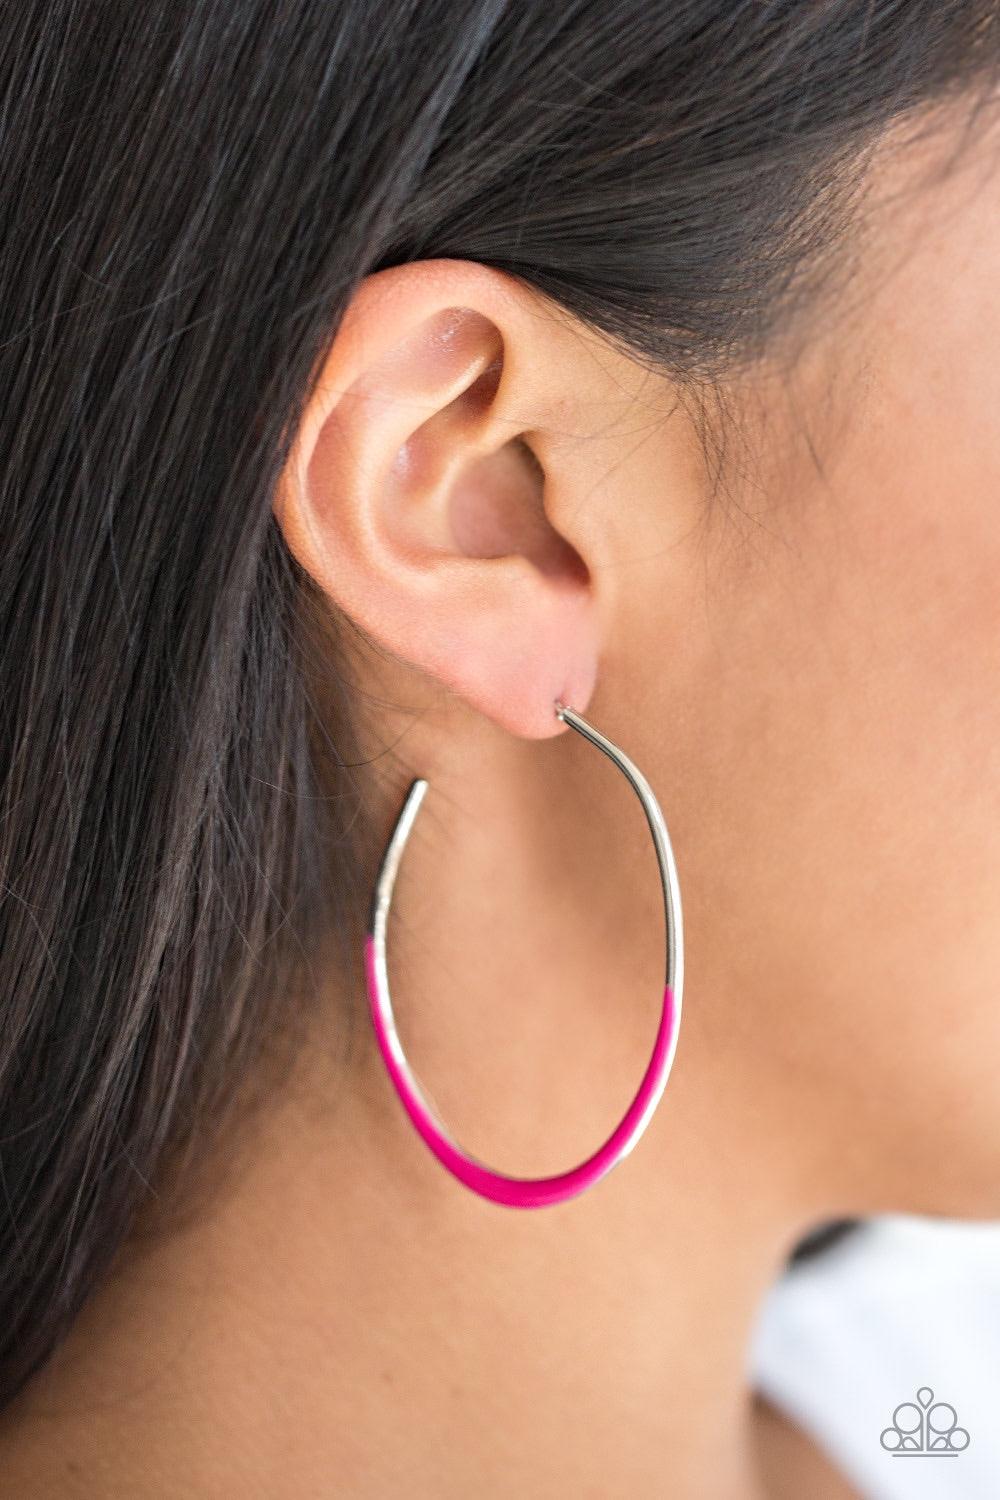 Paparazzi Accessories So Seren-DIP-itous - Pink As if dipped in paint, the bottom of an asymmetrical silver hoop has been glazed in a shiny pink finish for a colorful finish. Earring attaches to a standard post fitting. Hoop measures 1 3/4" in diameter. J